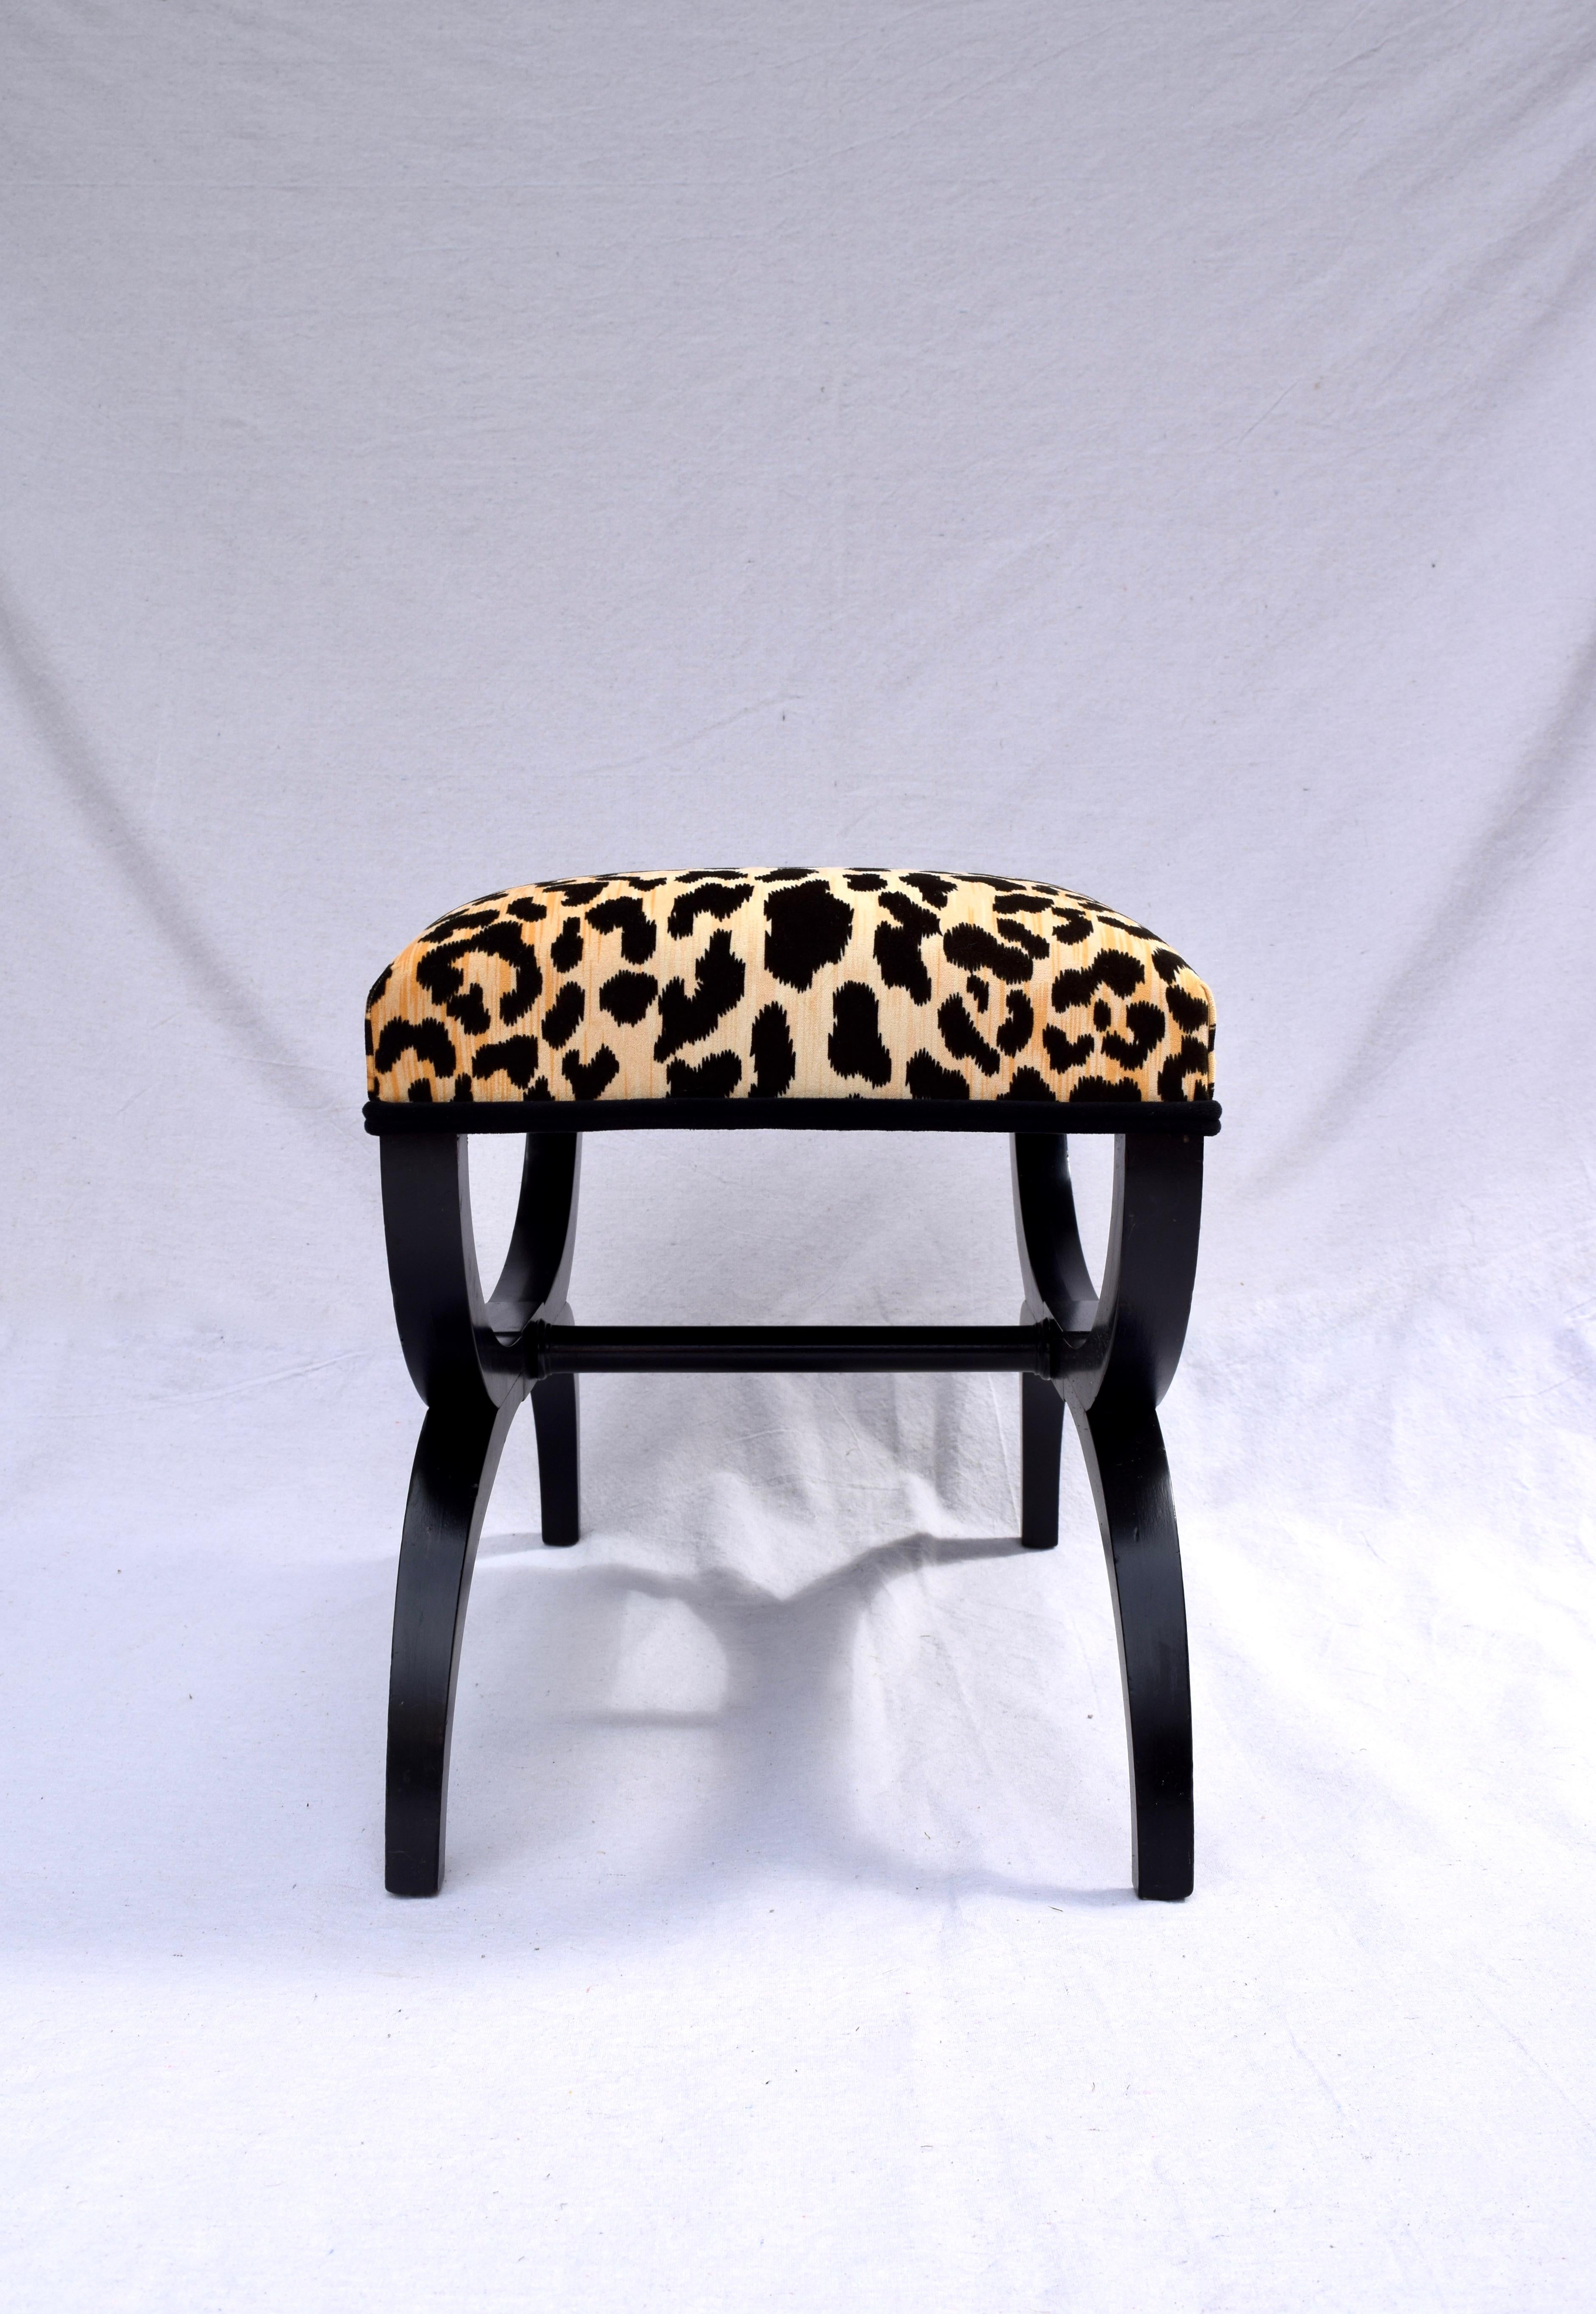 Late 20th Century Neoclassical Style Curule Bench or Stool in Velvet Leopard